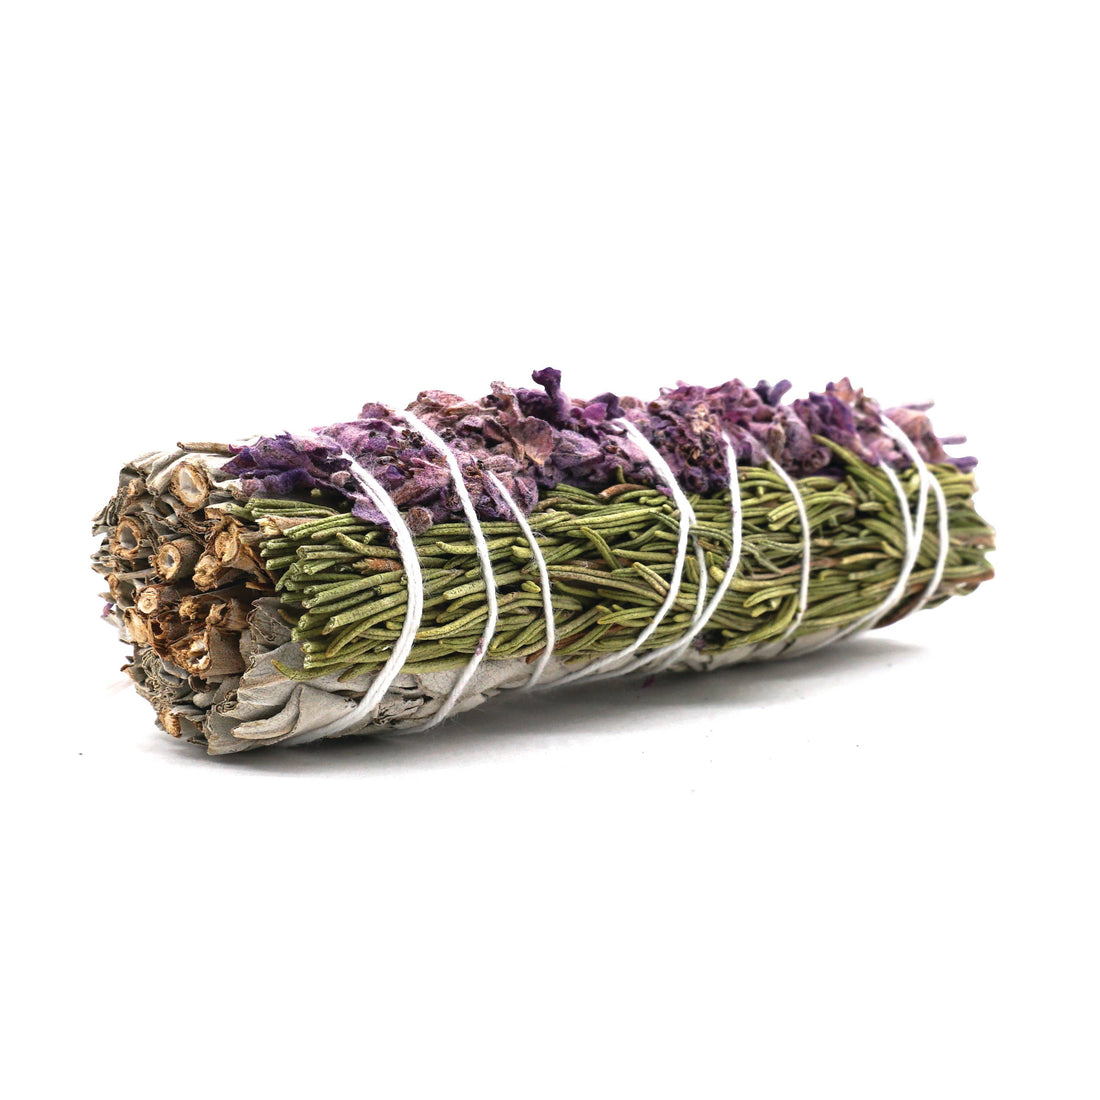 Lavender with Rosemary and White Sage Bundles